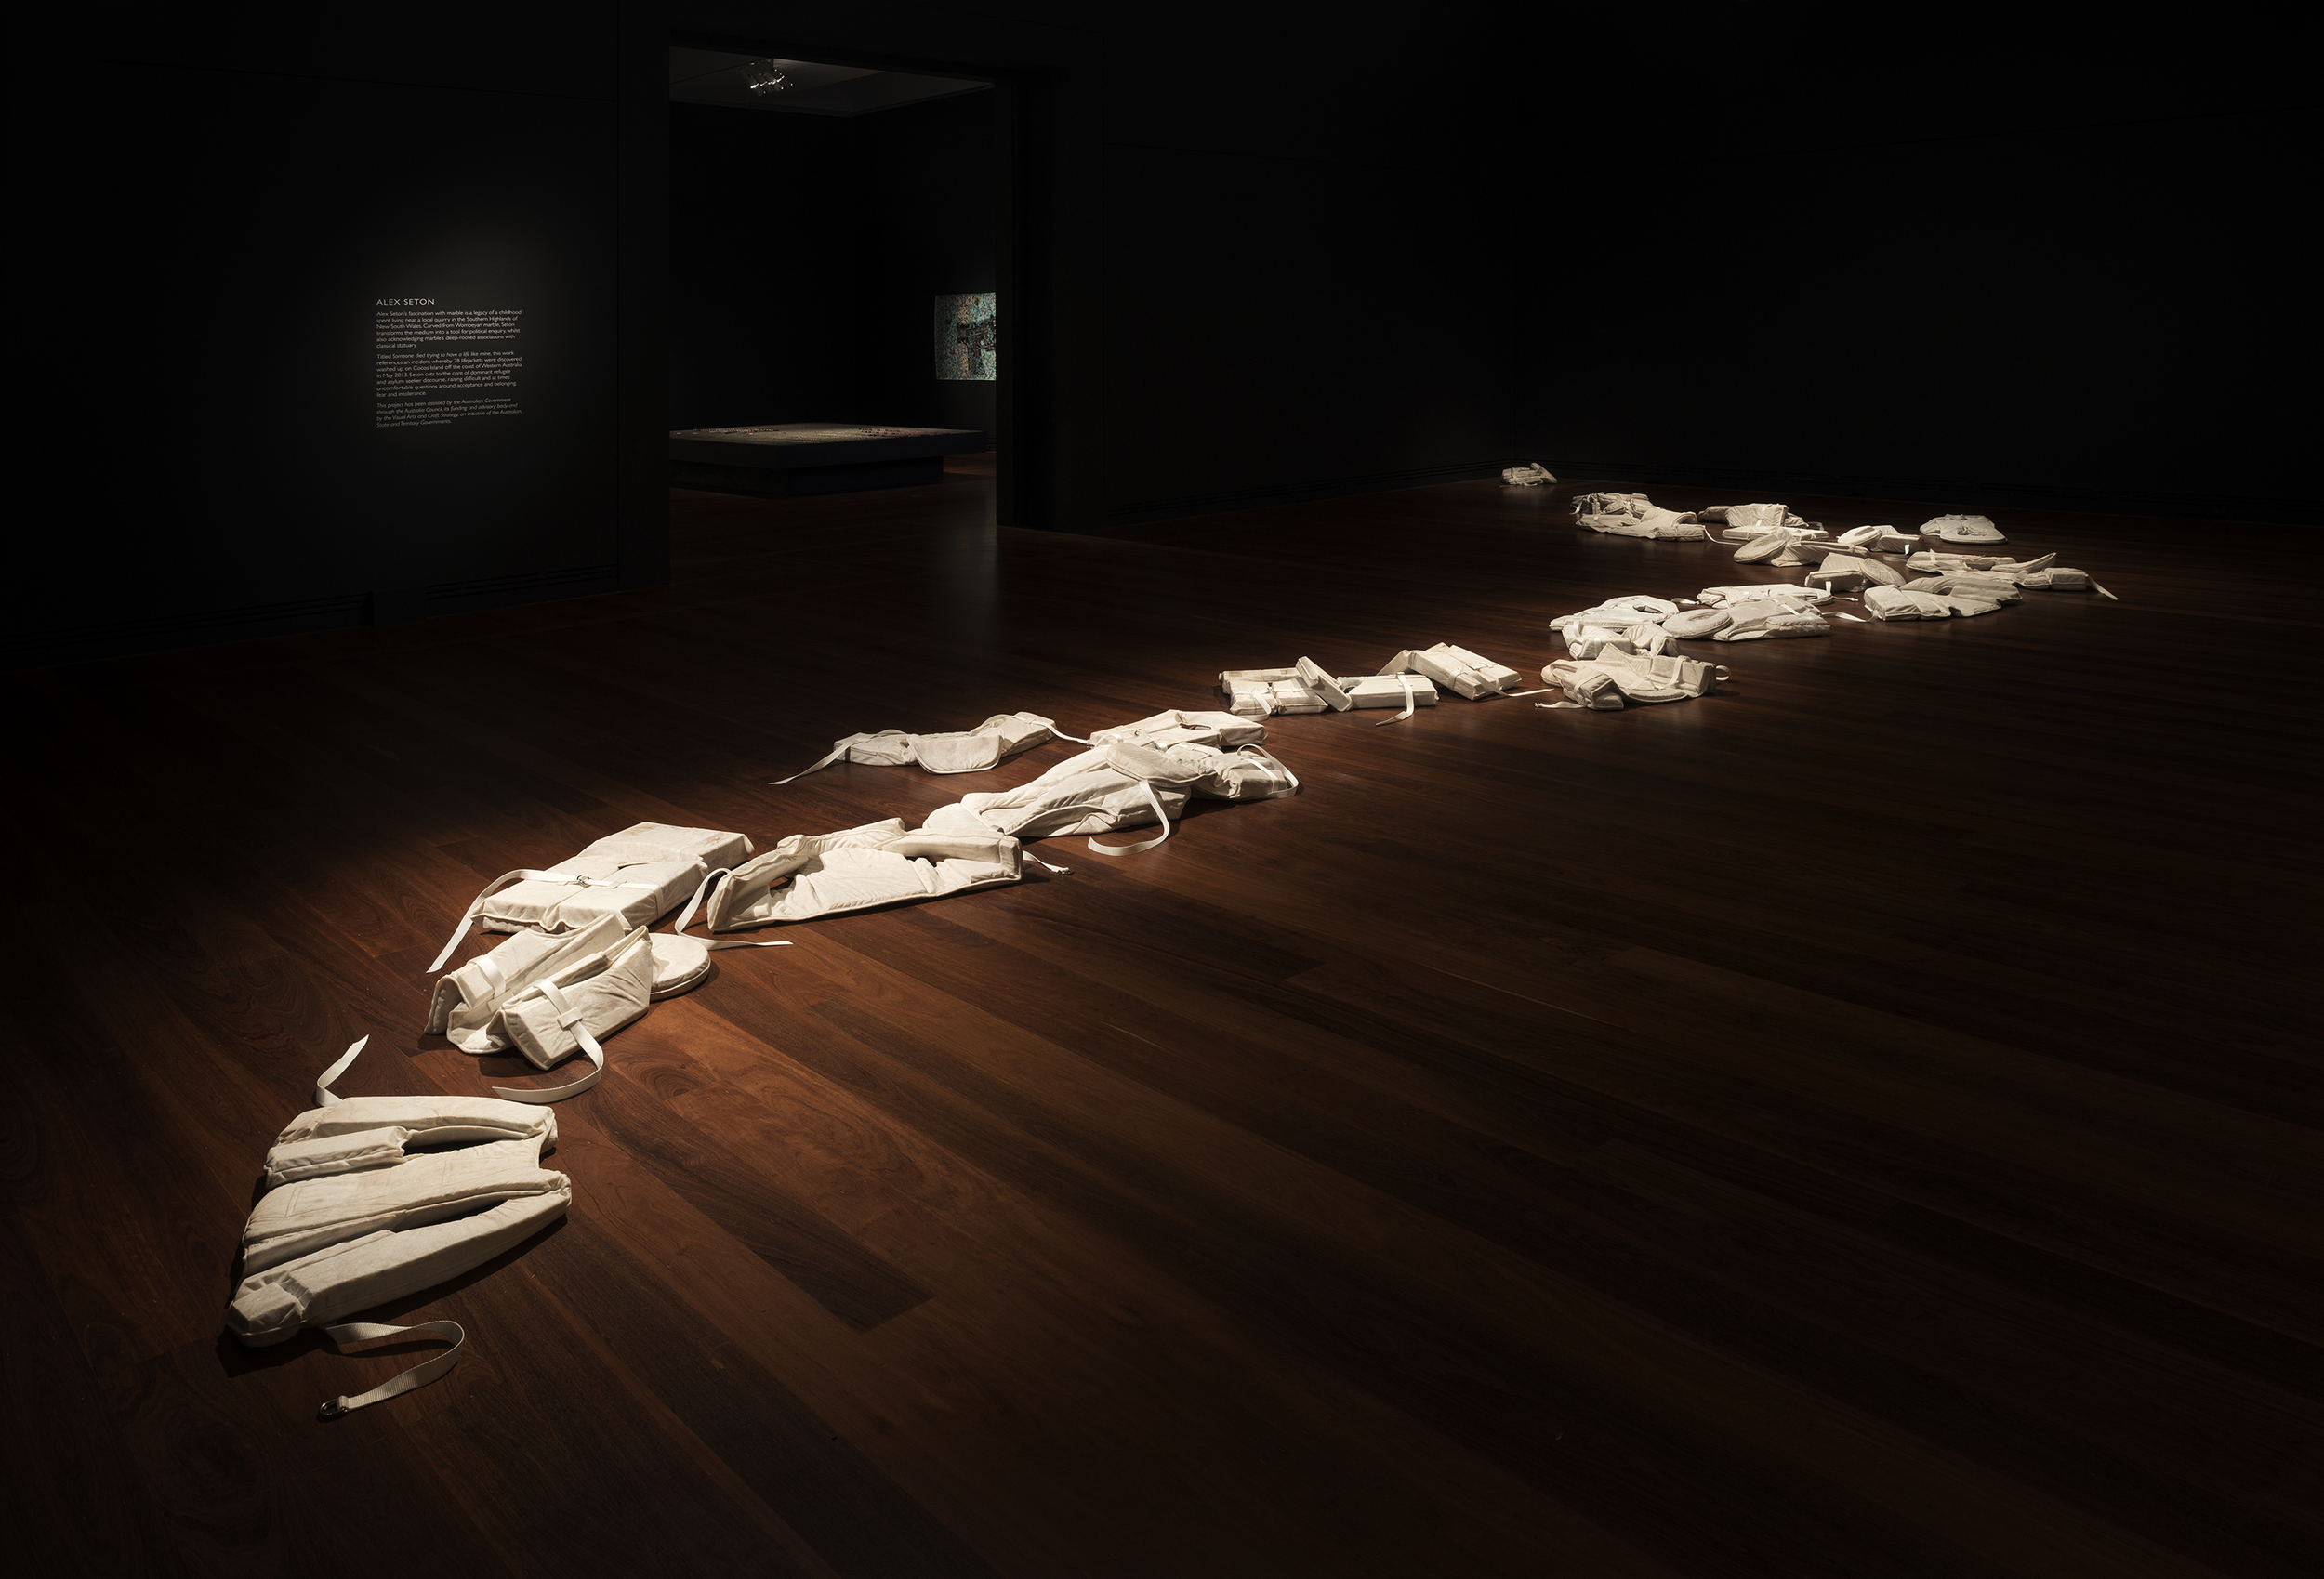   Dark Heart, 2014 Adelaide Biennial &nbsp; Art Gallery of South Australia  1 March - 11 May 2014   Someone died trying to have a life like mine  was produced for the 2014 Adelaide Biennial ‘Dark Heart’. The large sculptural installation referenced a